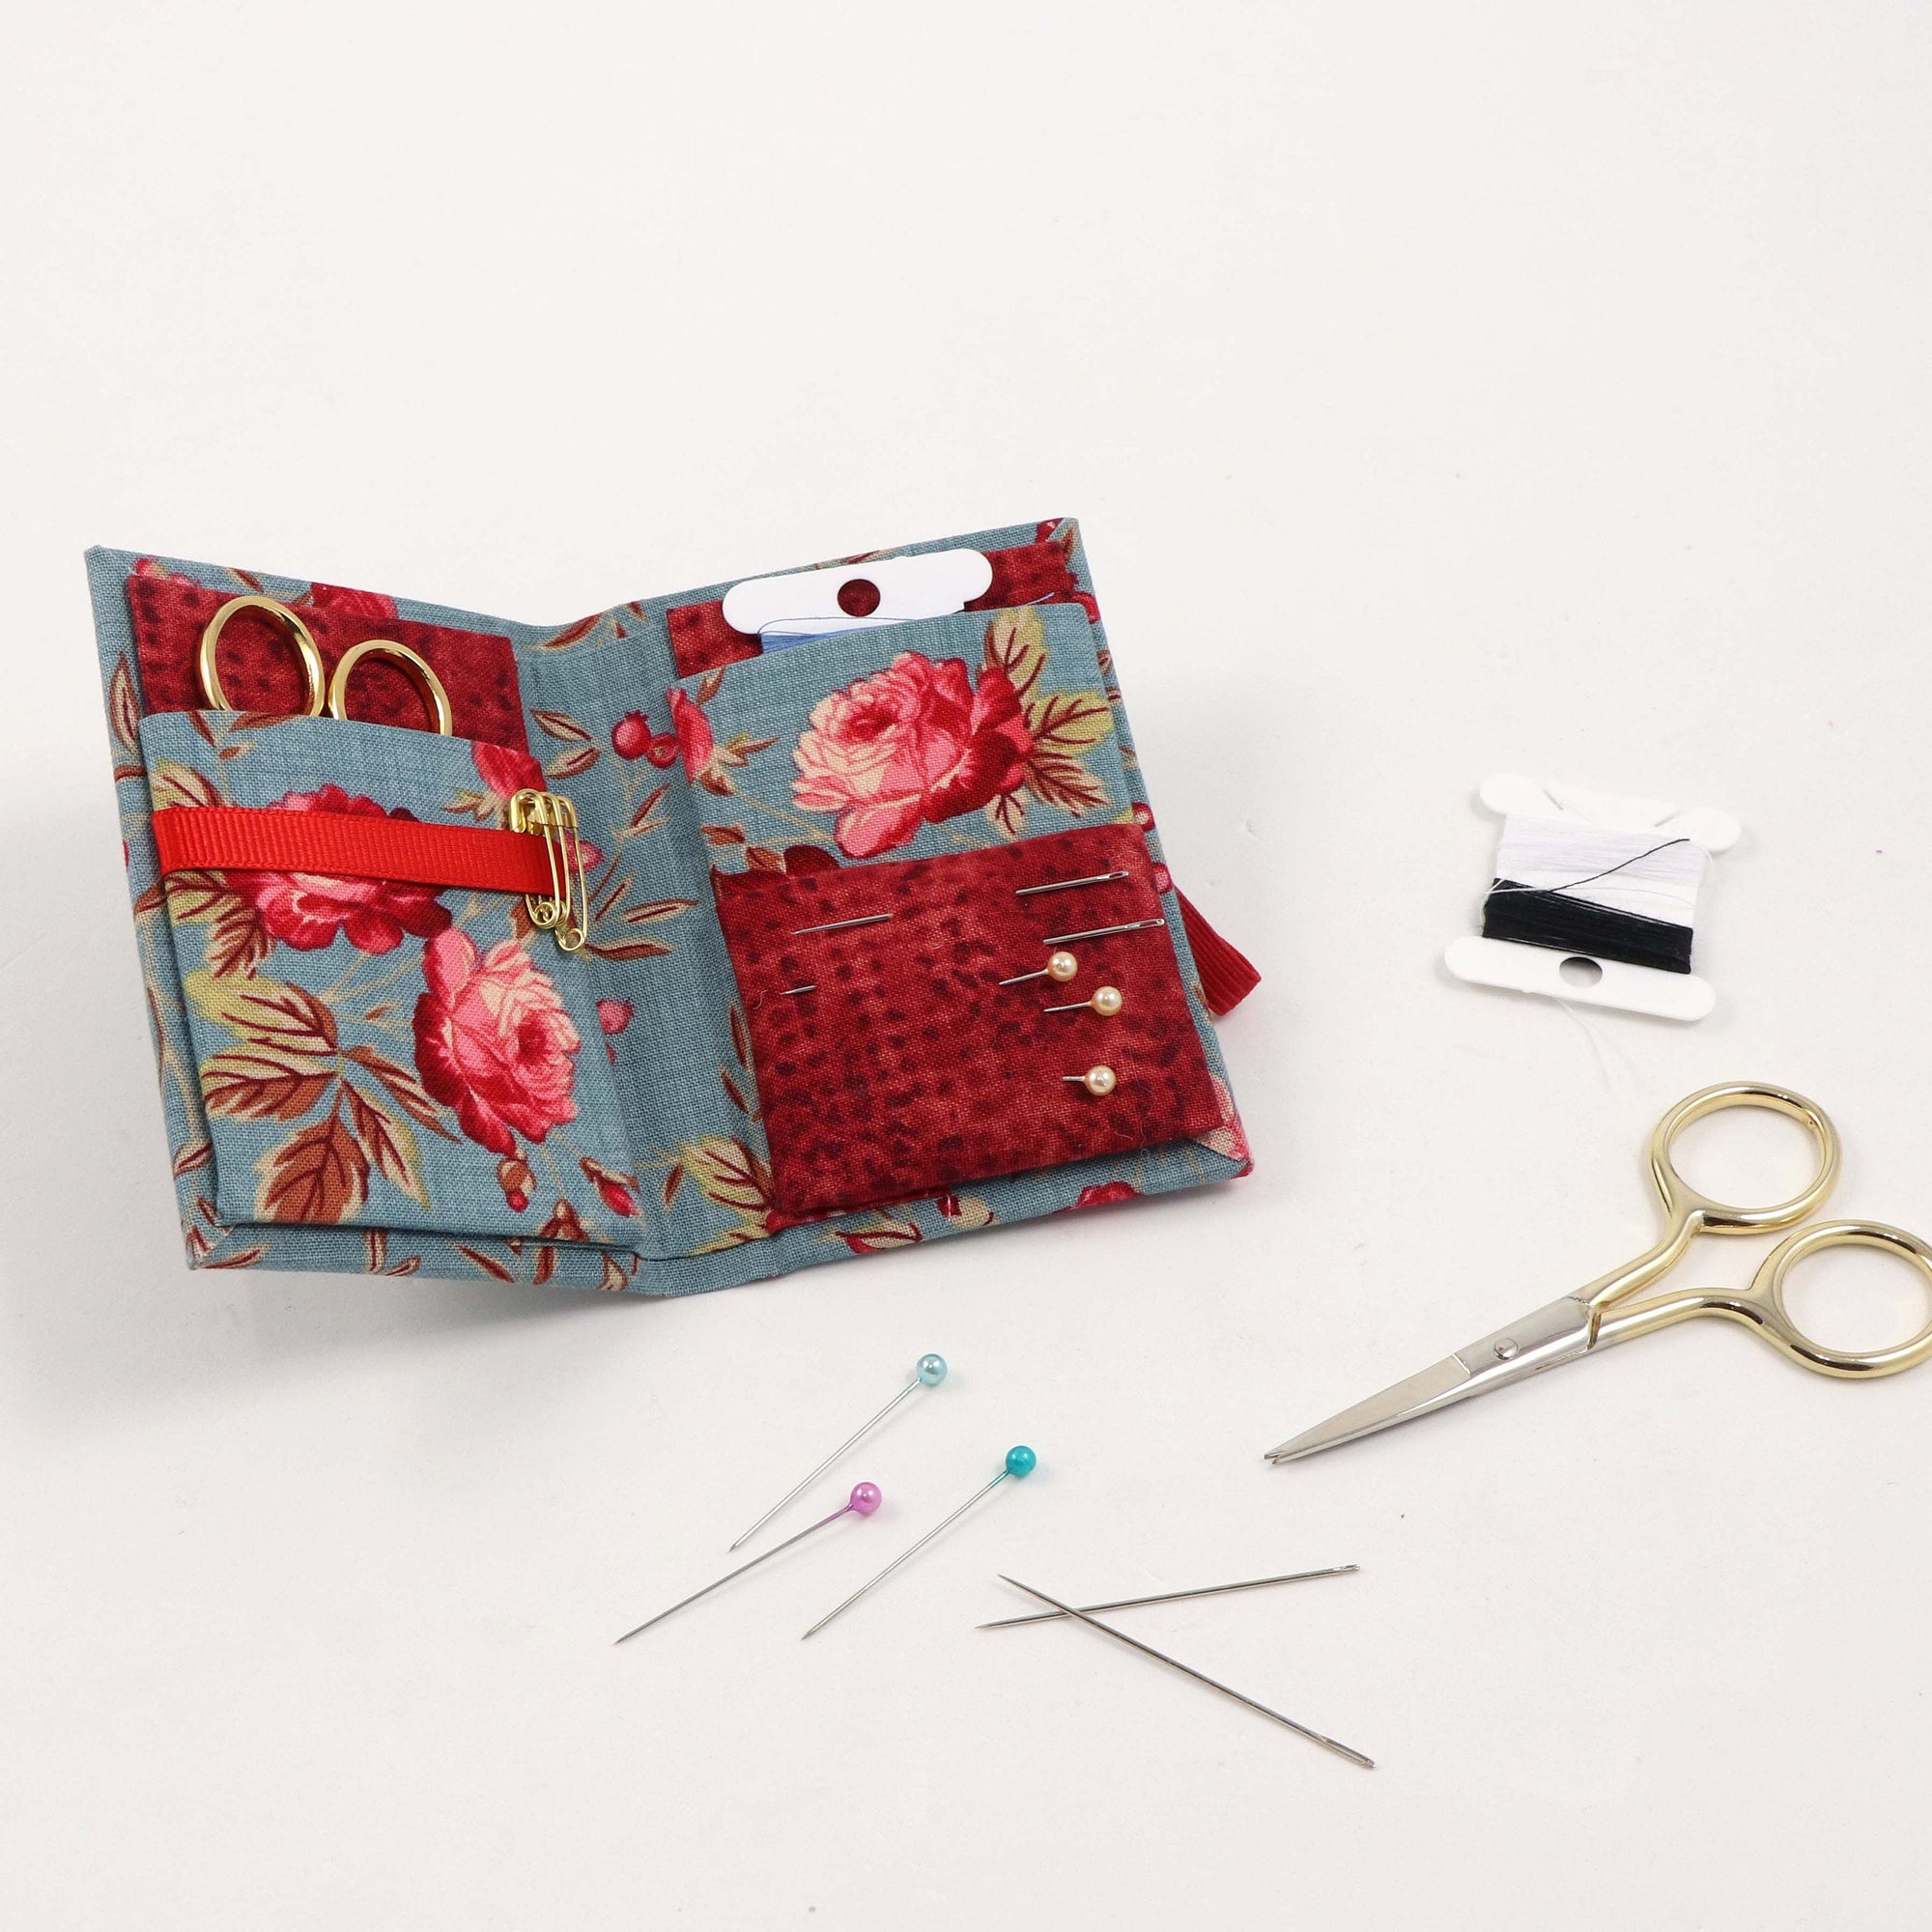 Serabeena Sew Your Own Bags: Easy and Fun Sewing Kit